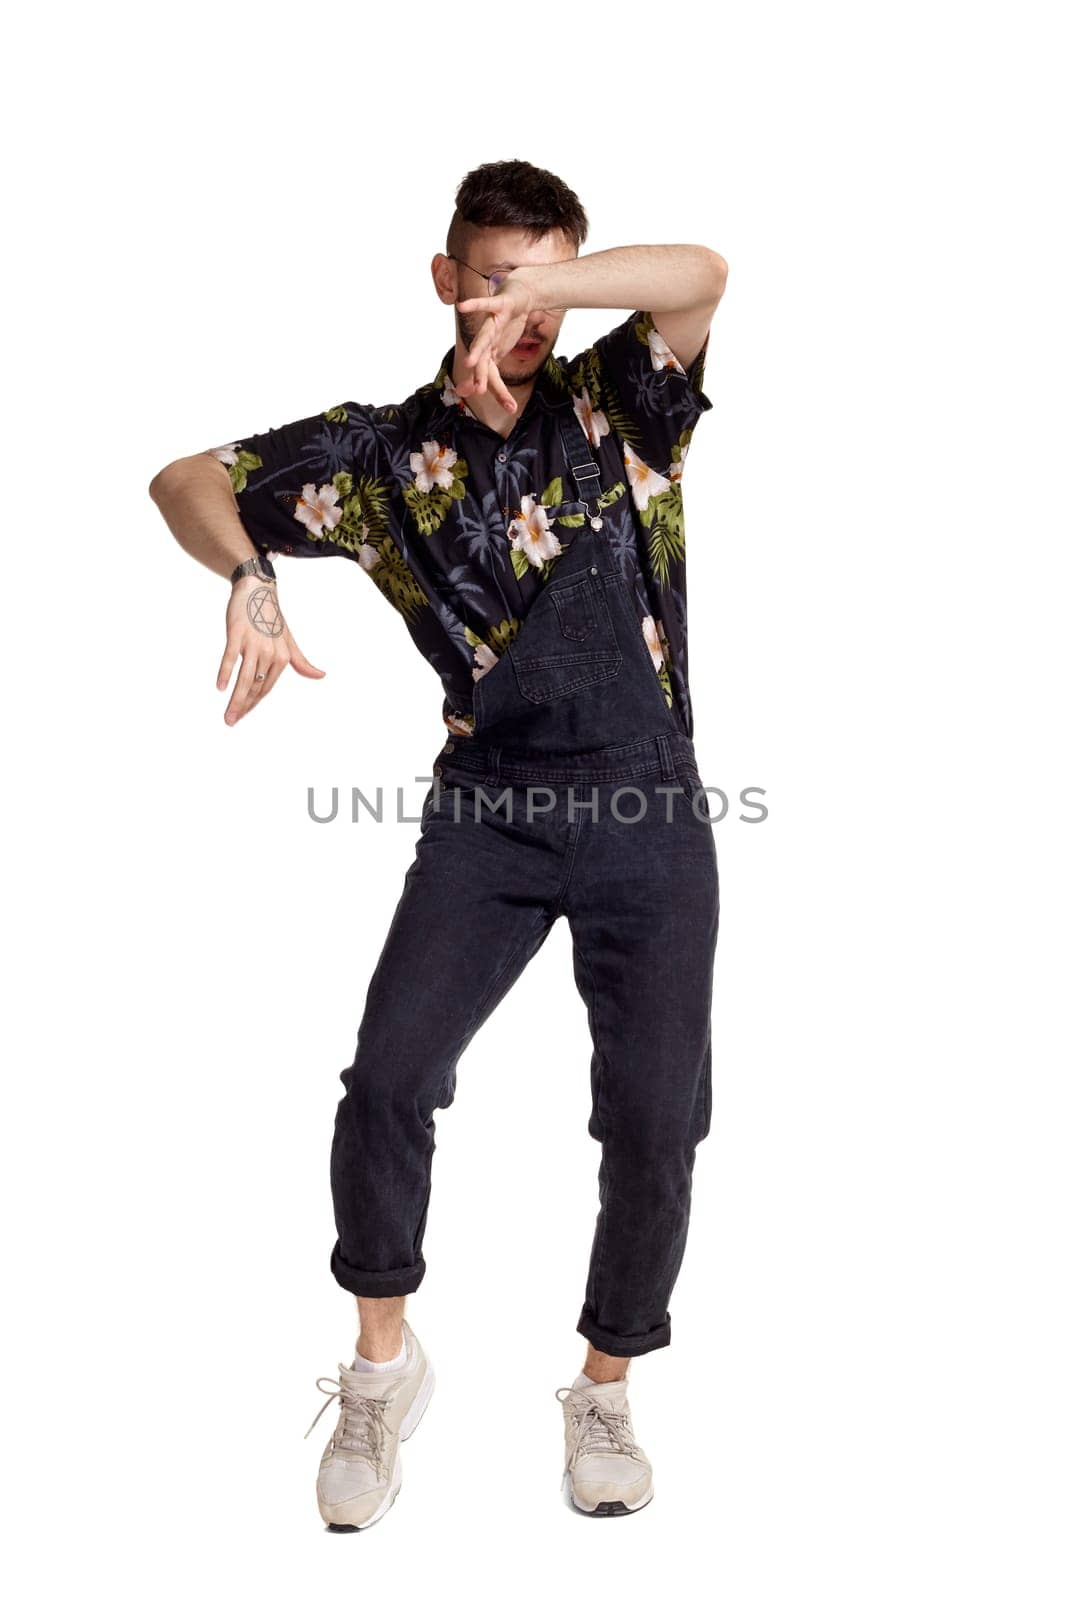 Full-length portrait of a cool man in glasses, black jumpsuit, colorful t-shirt and gray sneakers fooling around in studio. Indoor photo of a man dancing isolated on white background. Music and imagination. Copy space.